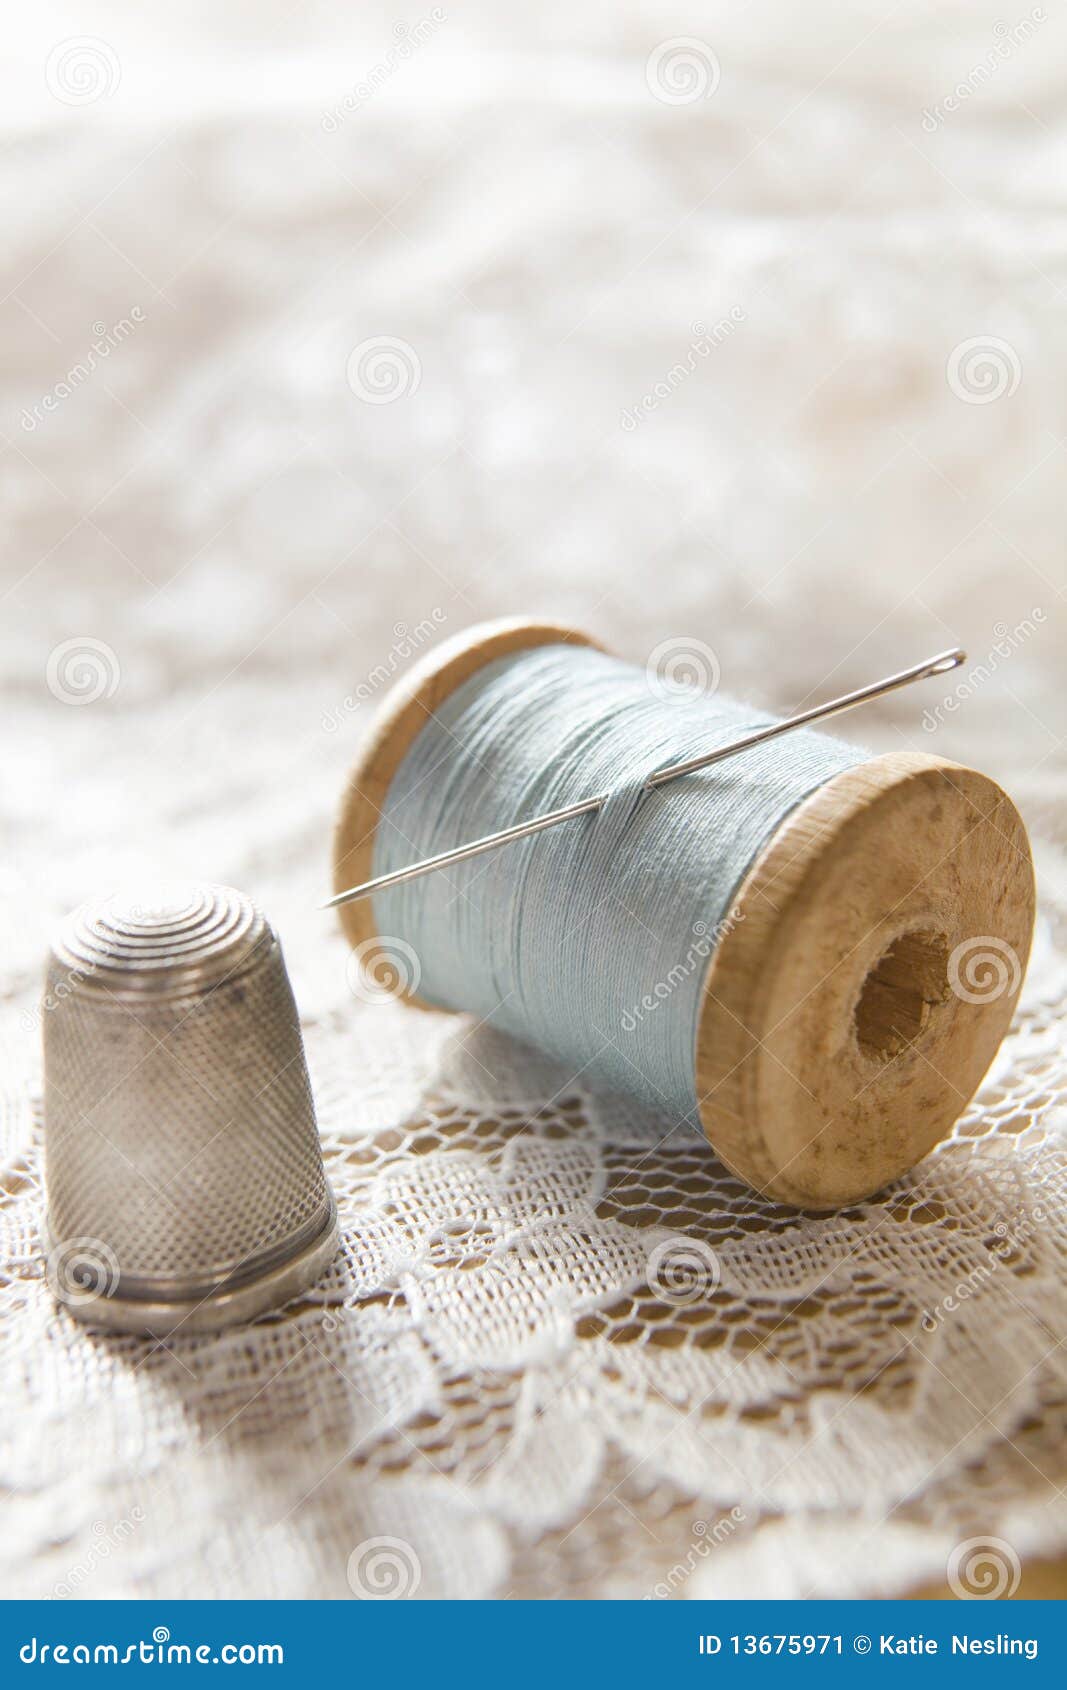 Vintage Cotton Reel with Needle and Silver Thimble Stock Image - Image of  dressmaking, vertical: 13675971